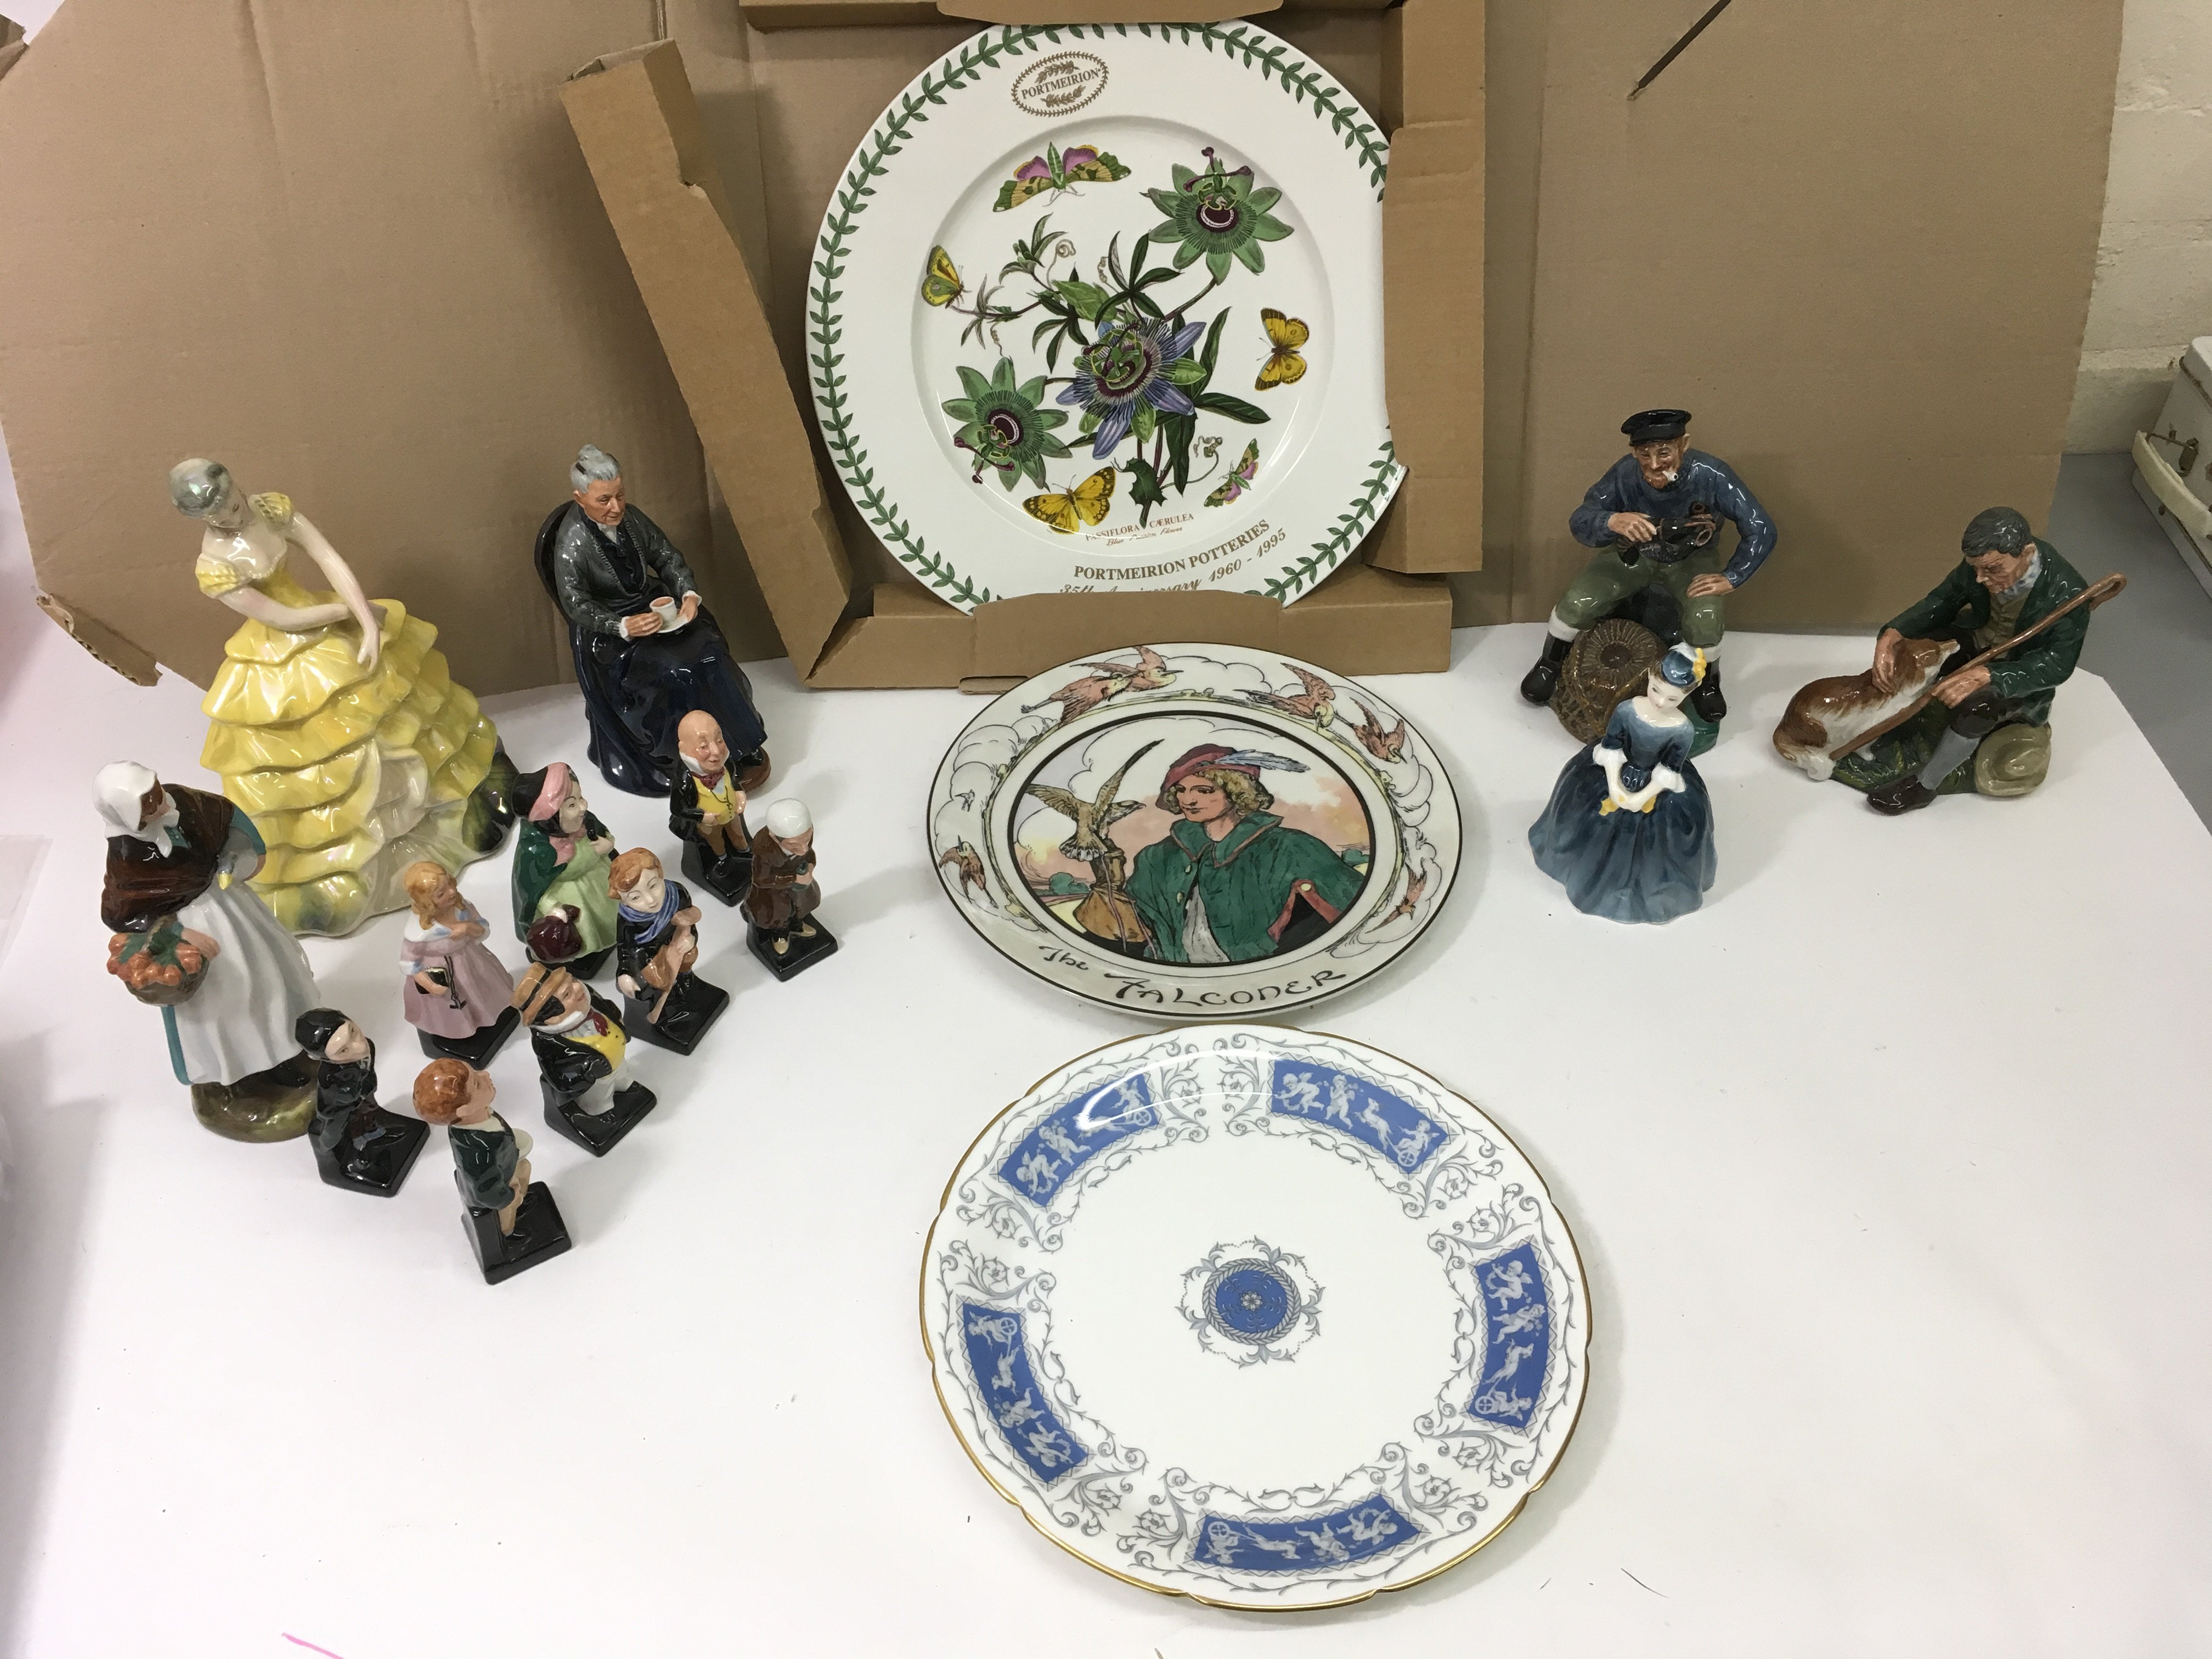 A large Portmeirion collector's plate and Royal Do